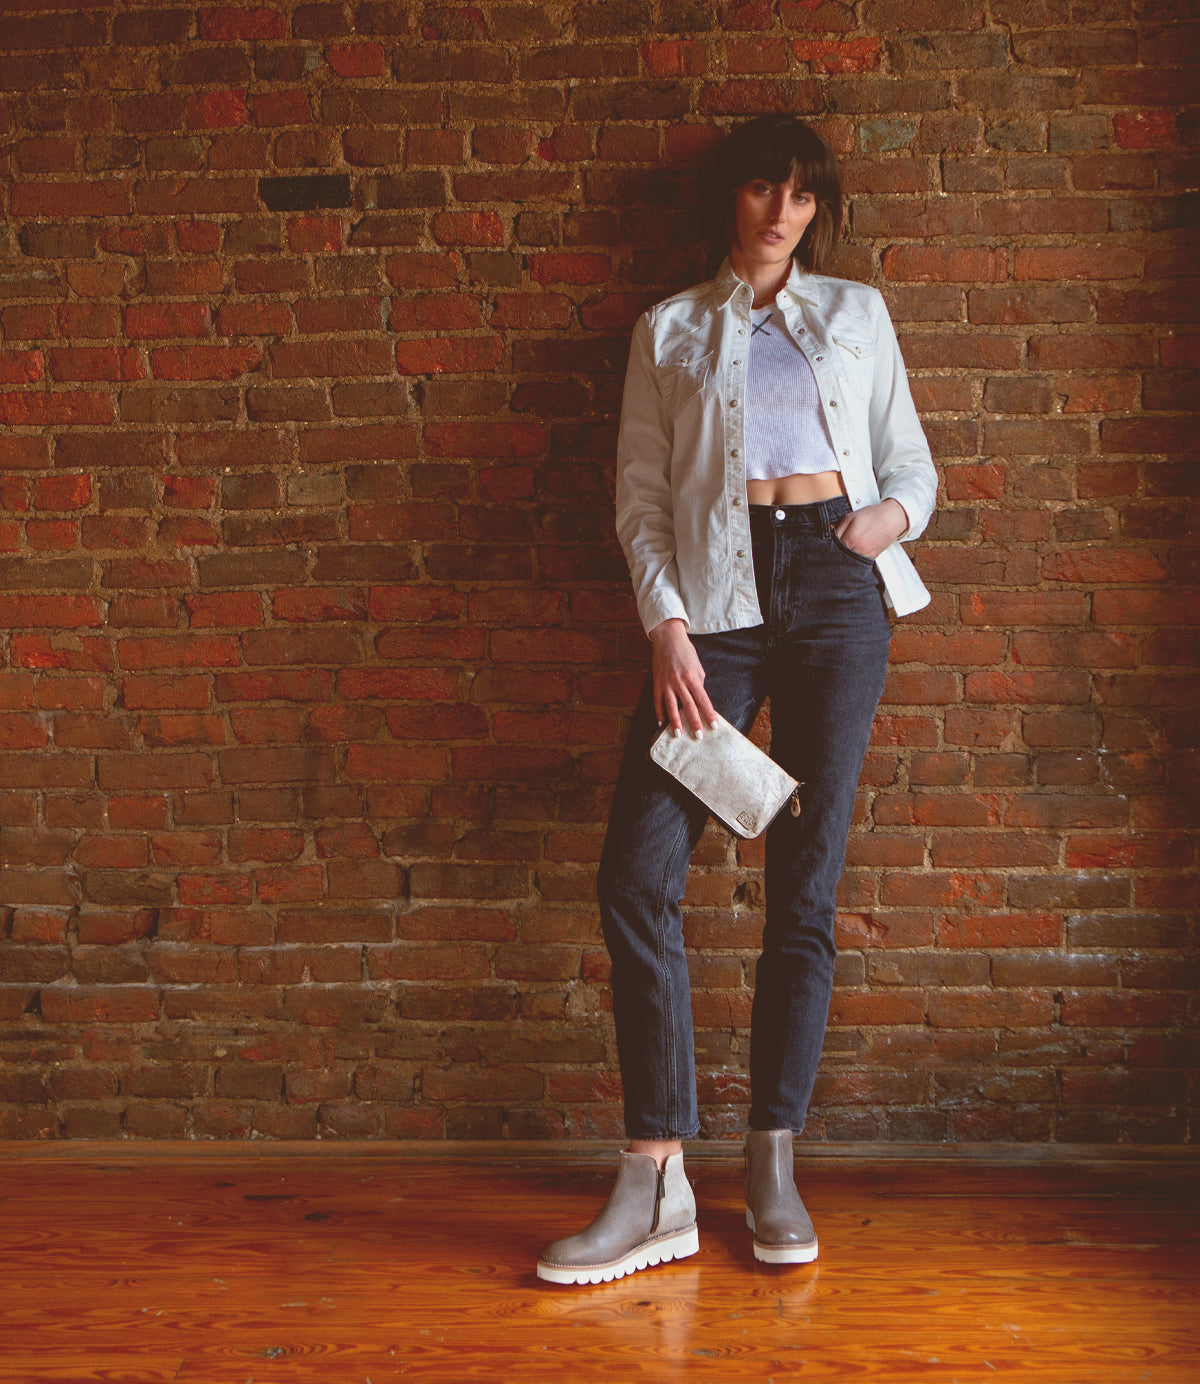 A woman leaning against a brick wall wearing jeans, a white jacket, and Bed Stu Lydyi leather ankle boots.